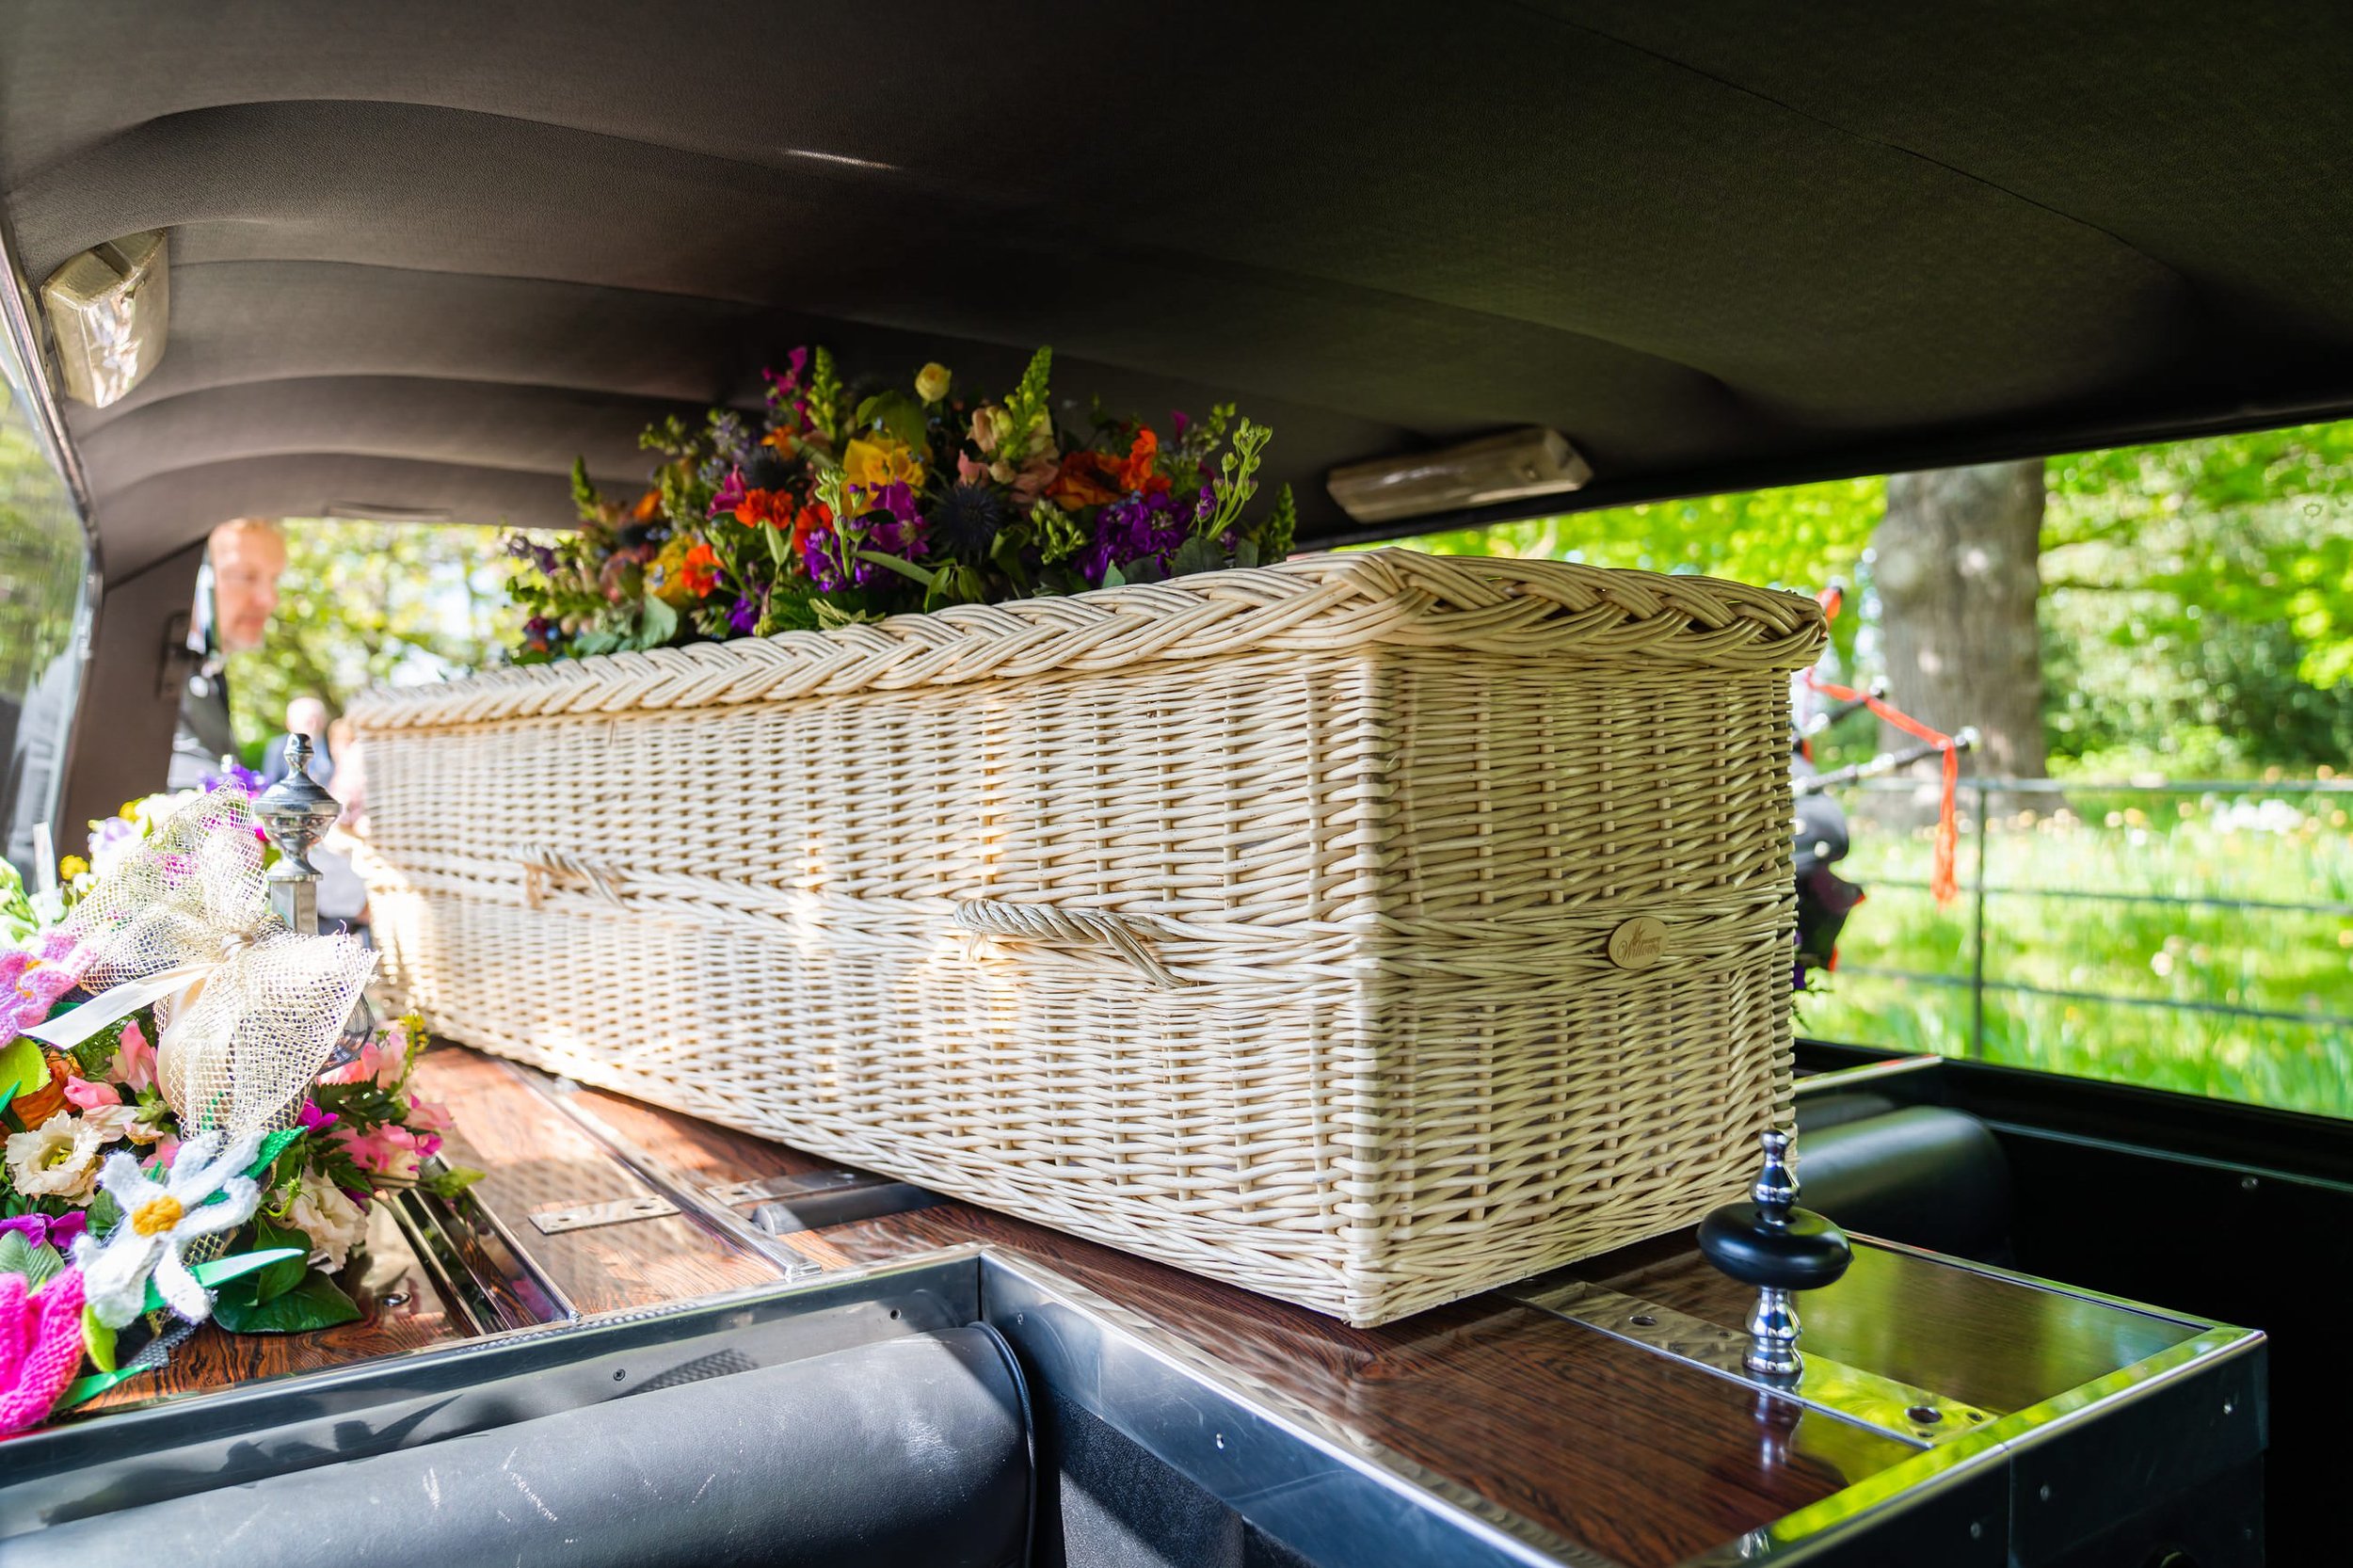 UK Funeral Photographers and Funeral Photography